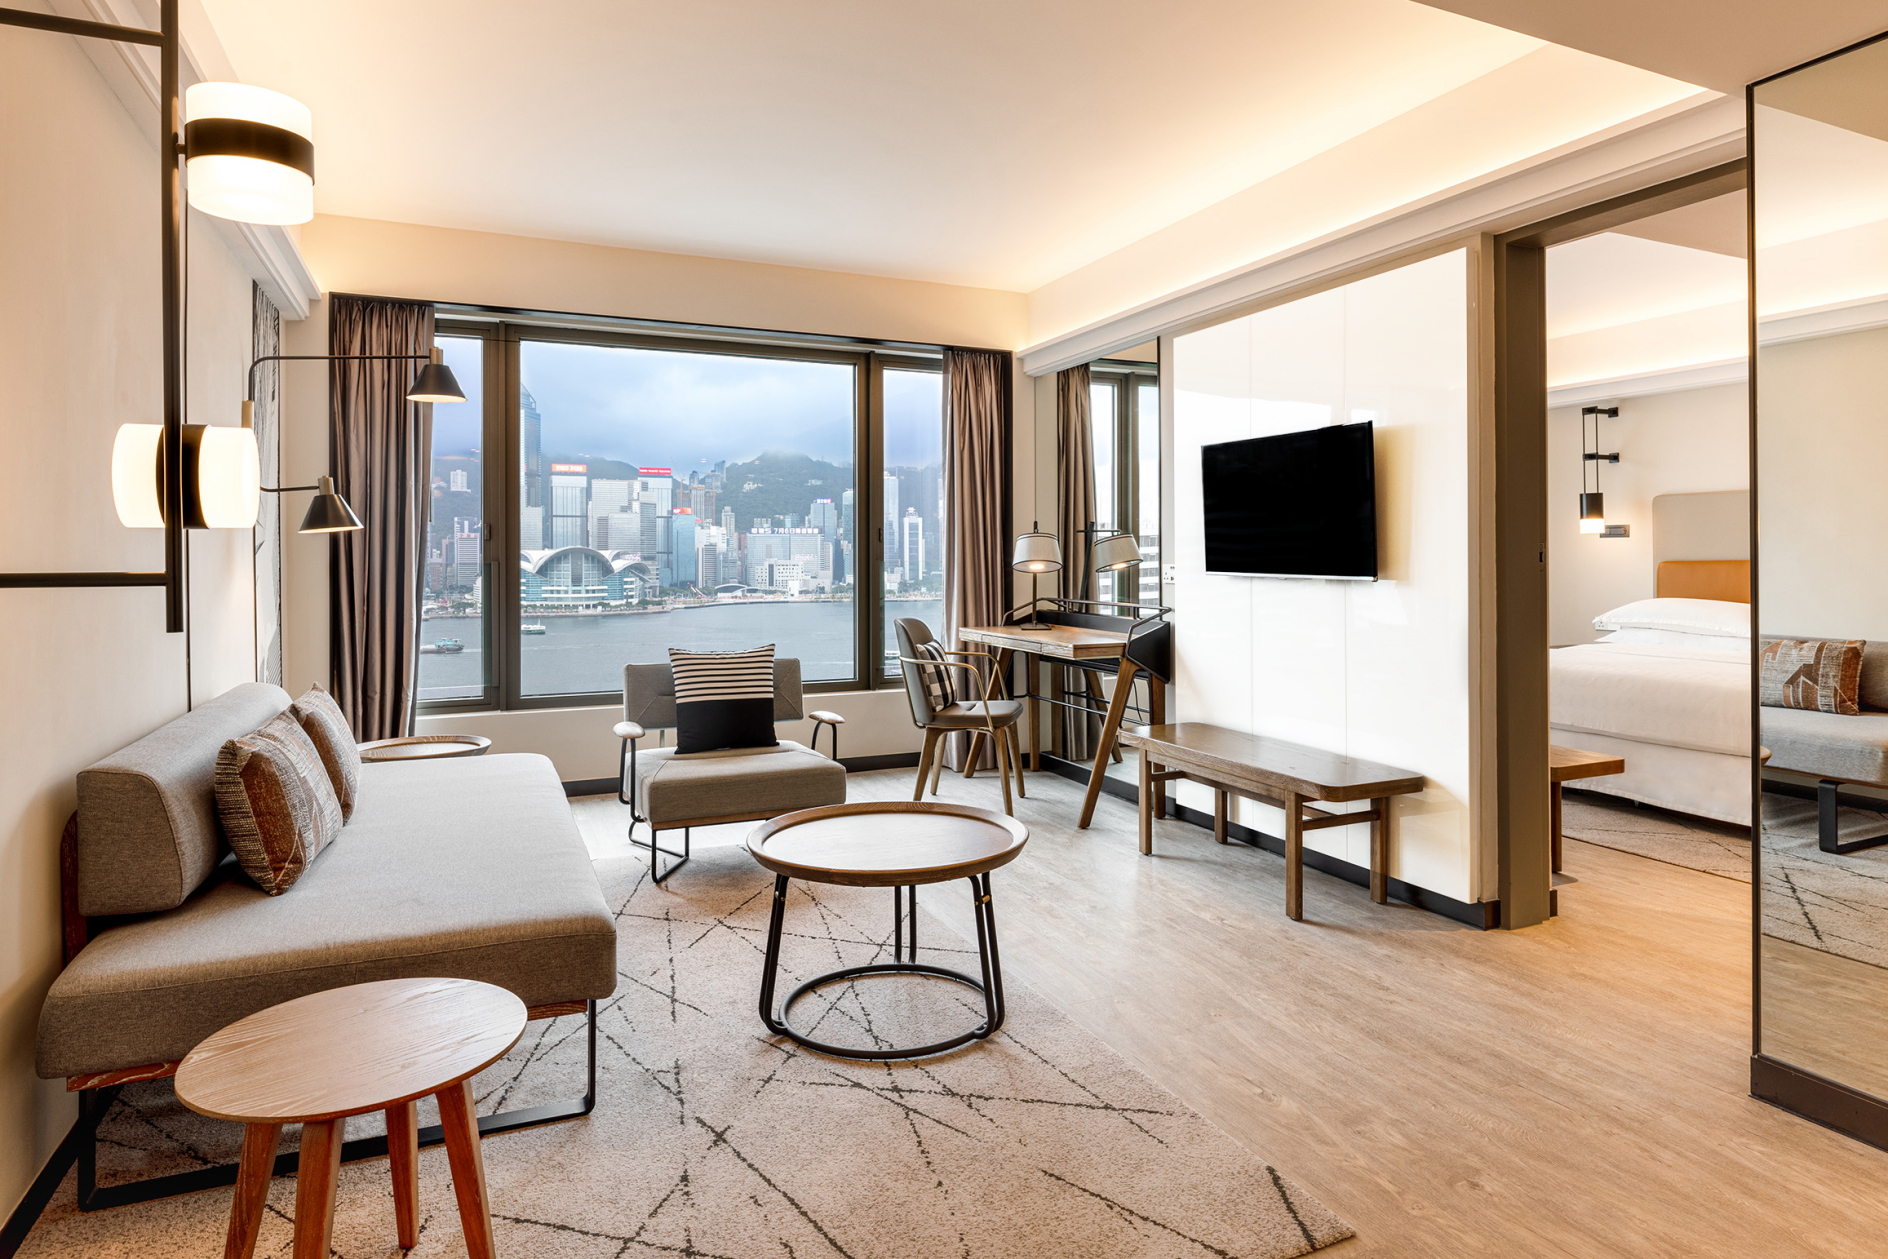 Living room of a Harbour View Suite at the Sheraton Hong Kong Hotel and Towers. Click to enlarge.